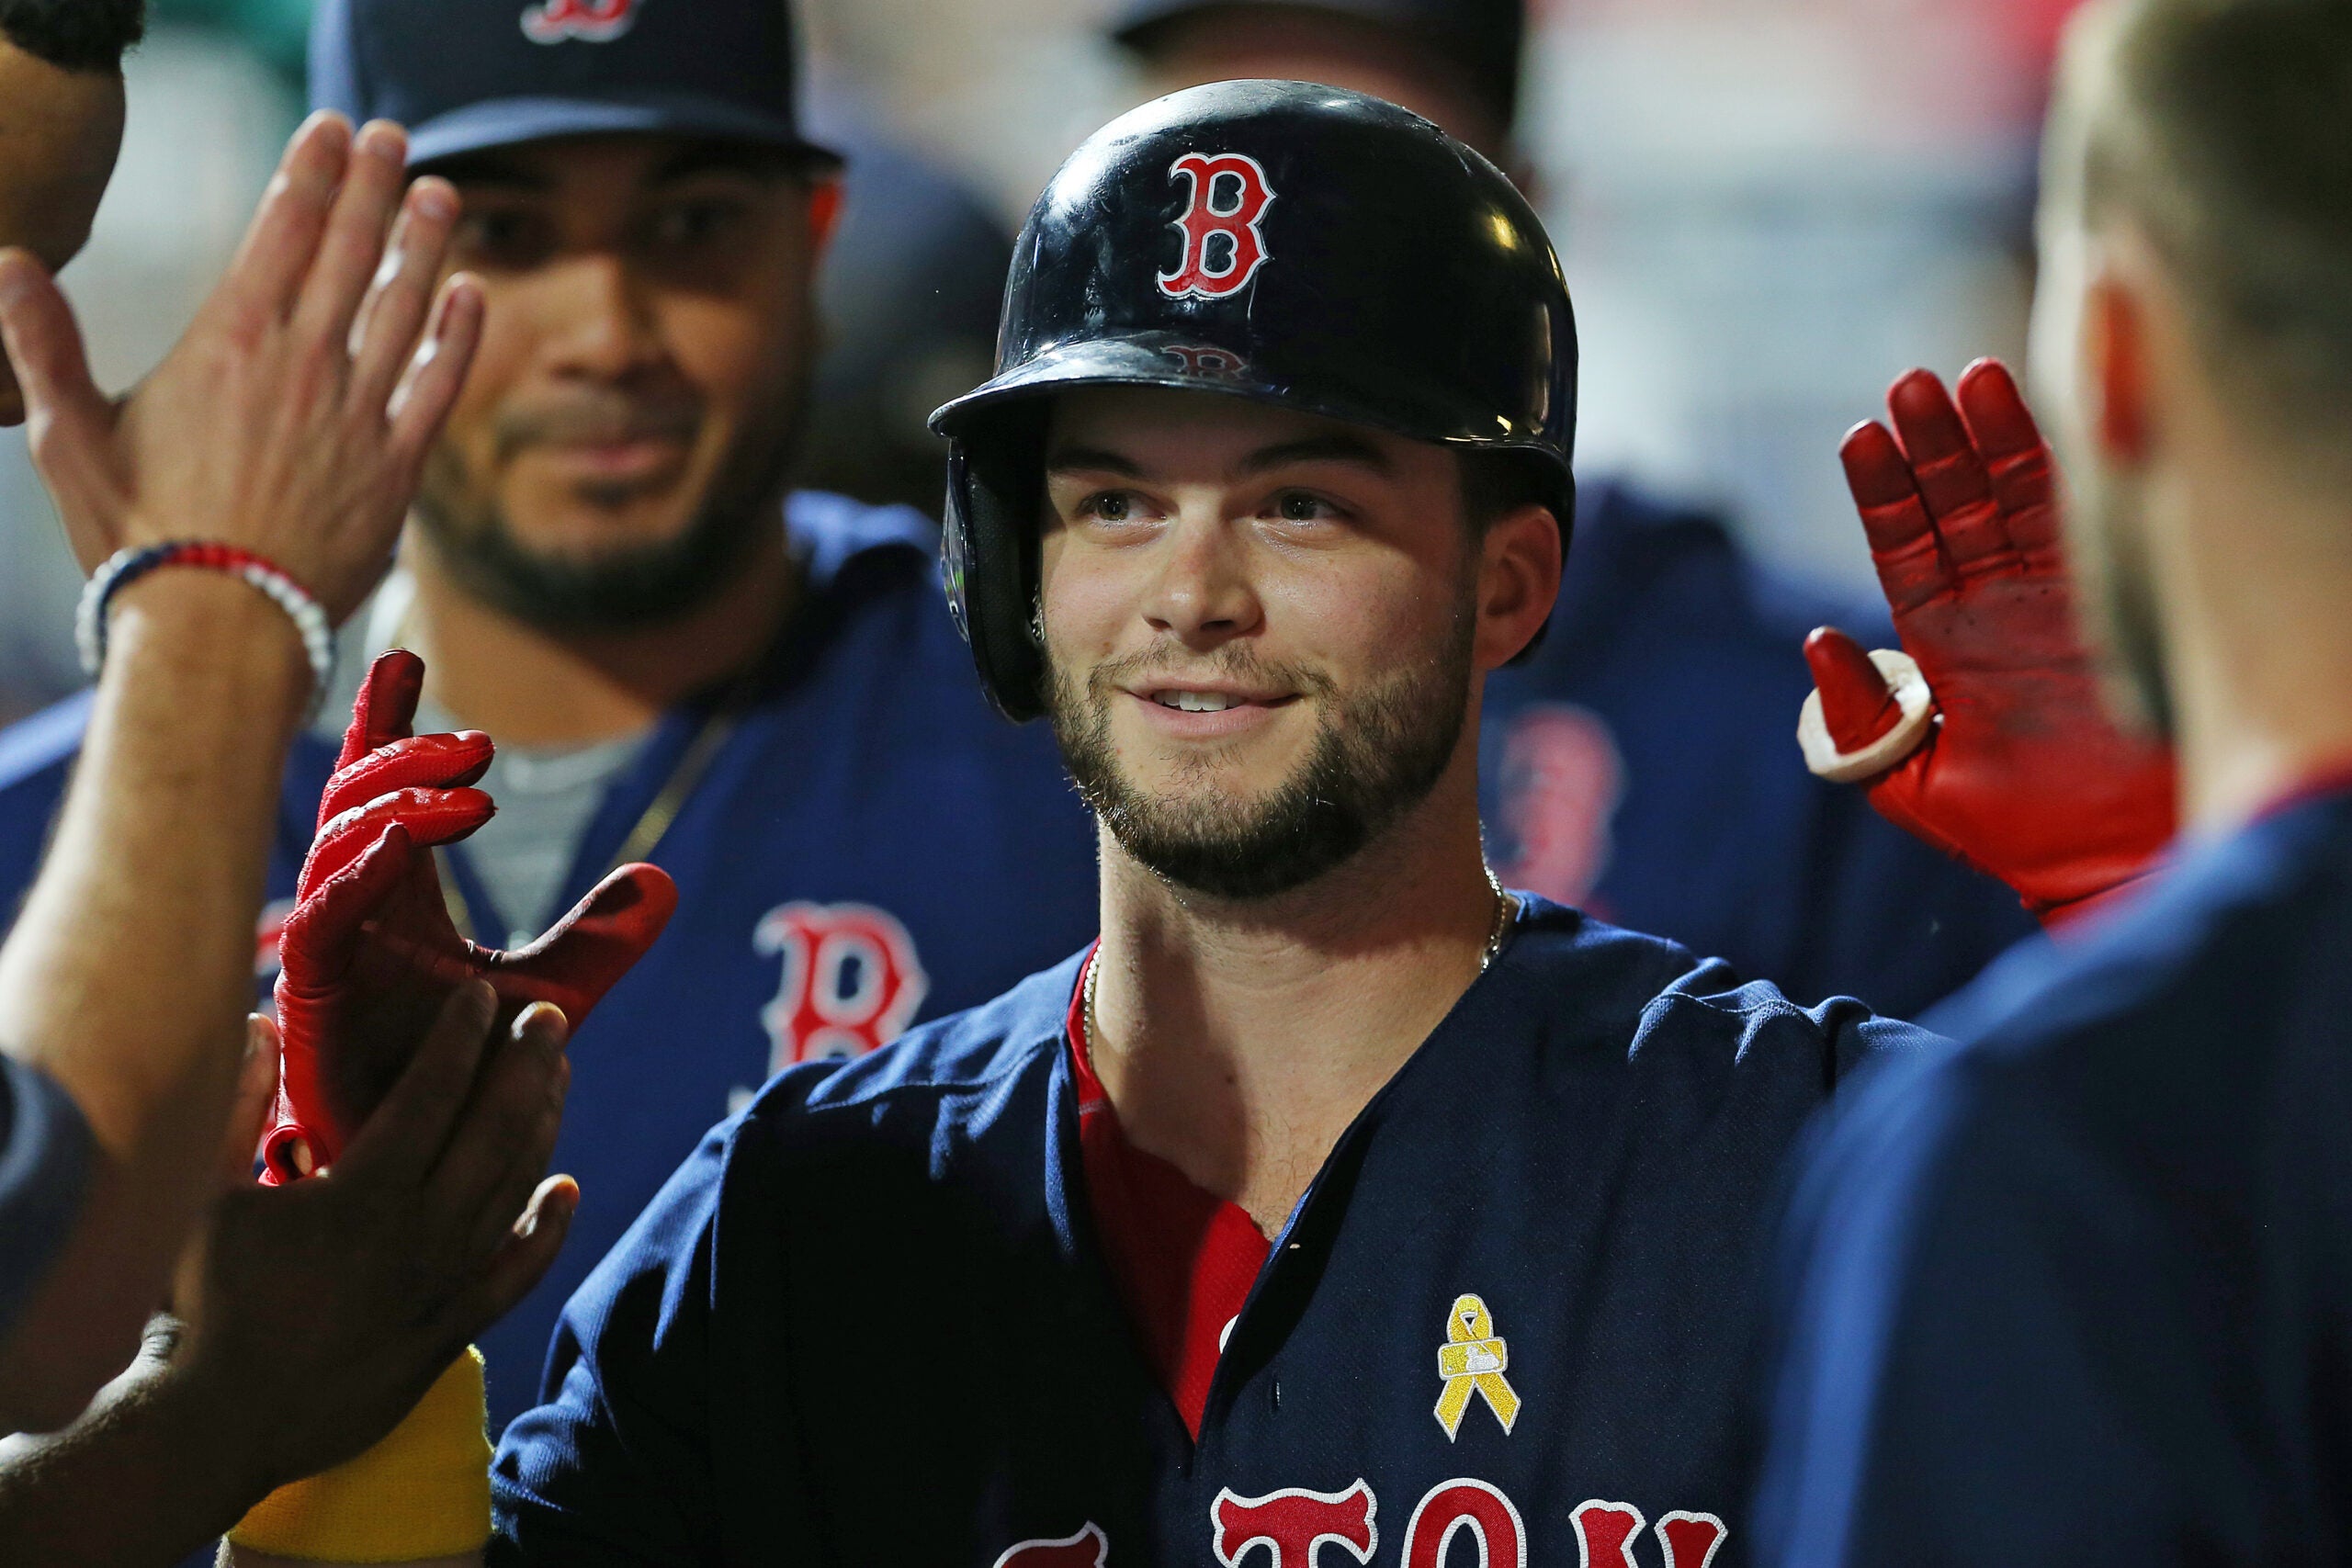 Andrew Benintendi's First All-Star Selection